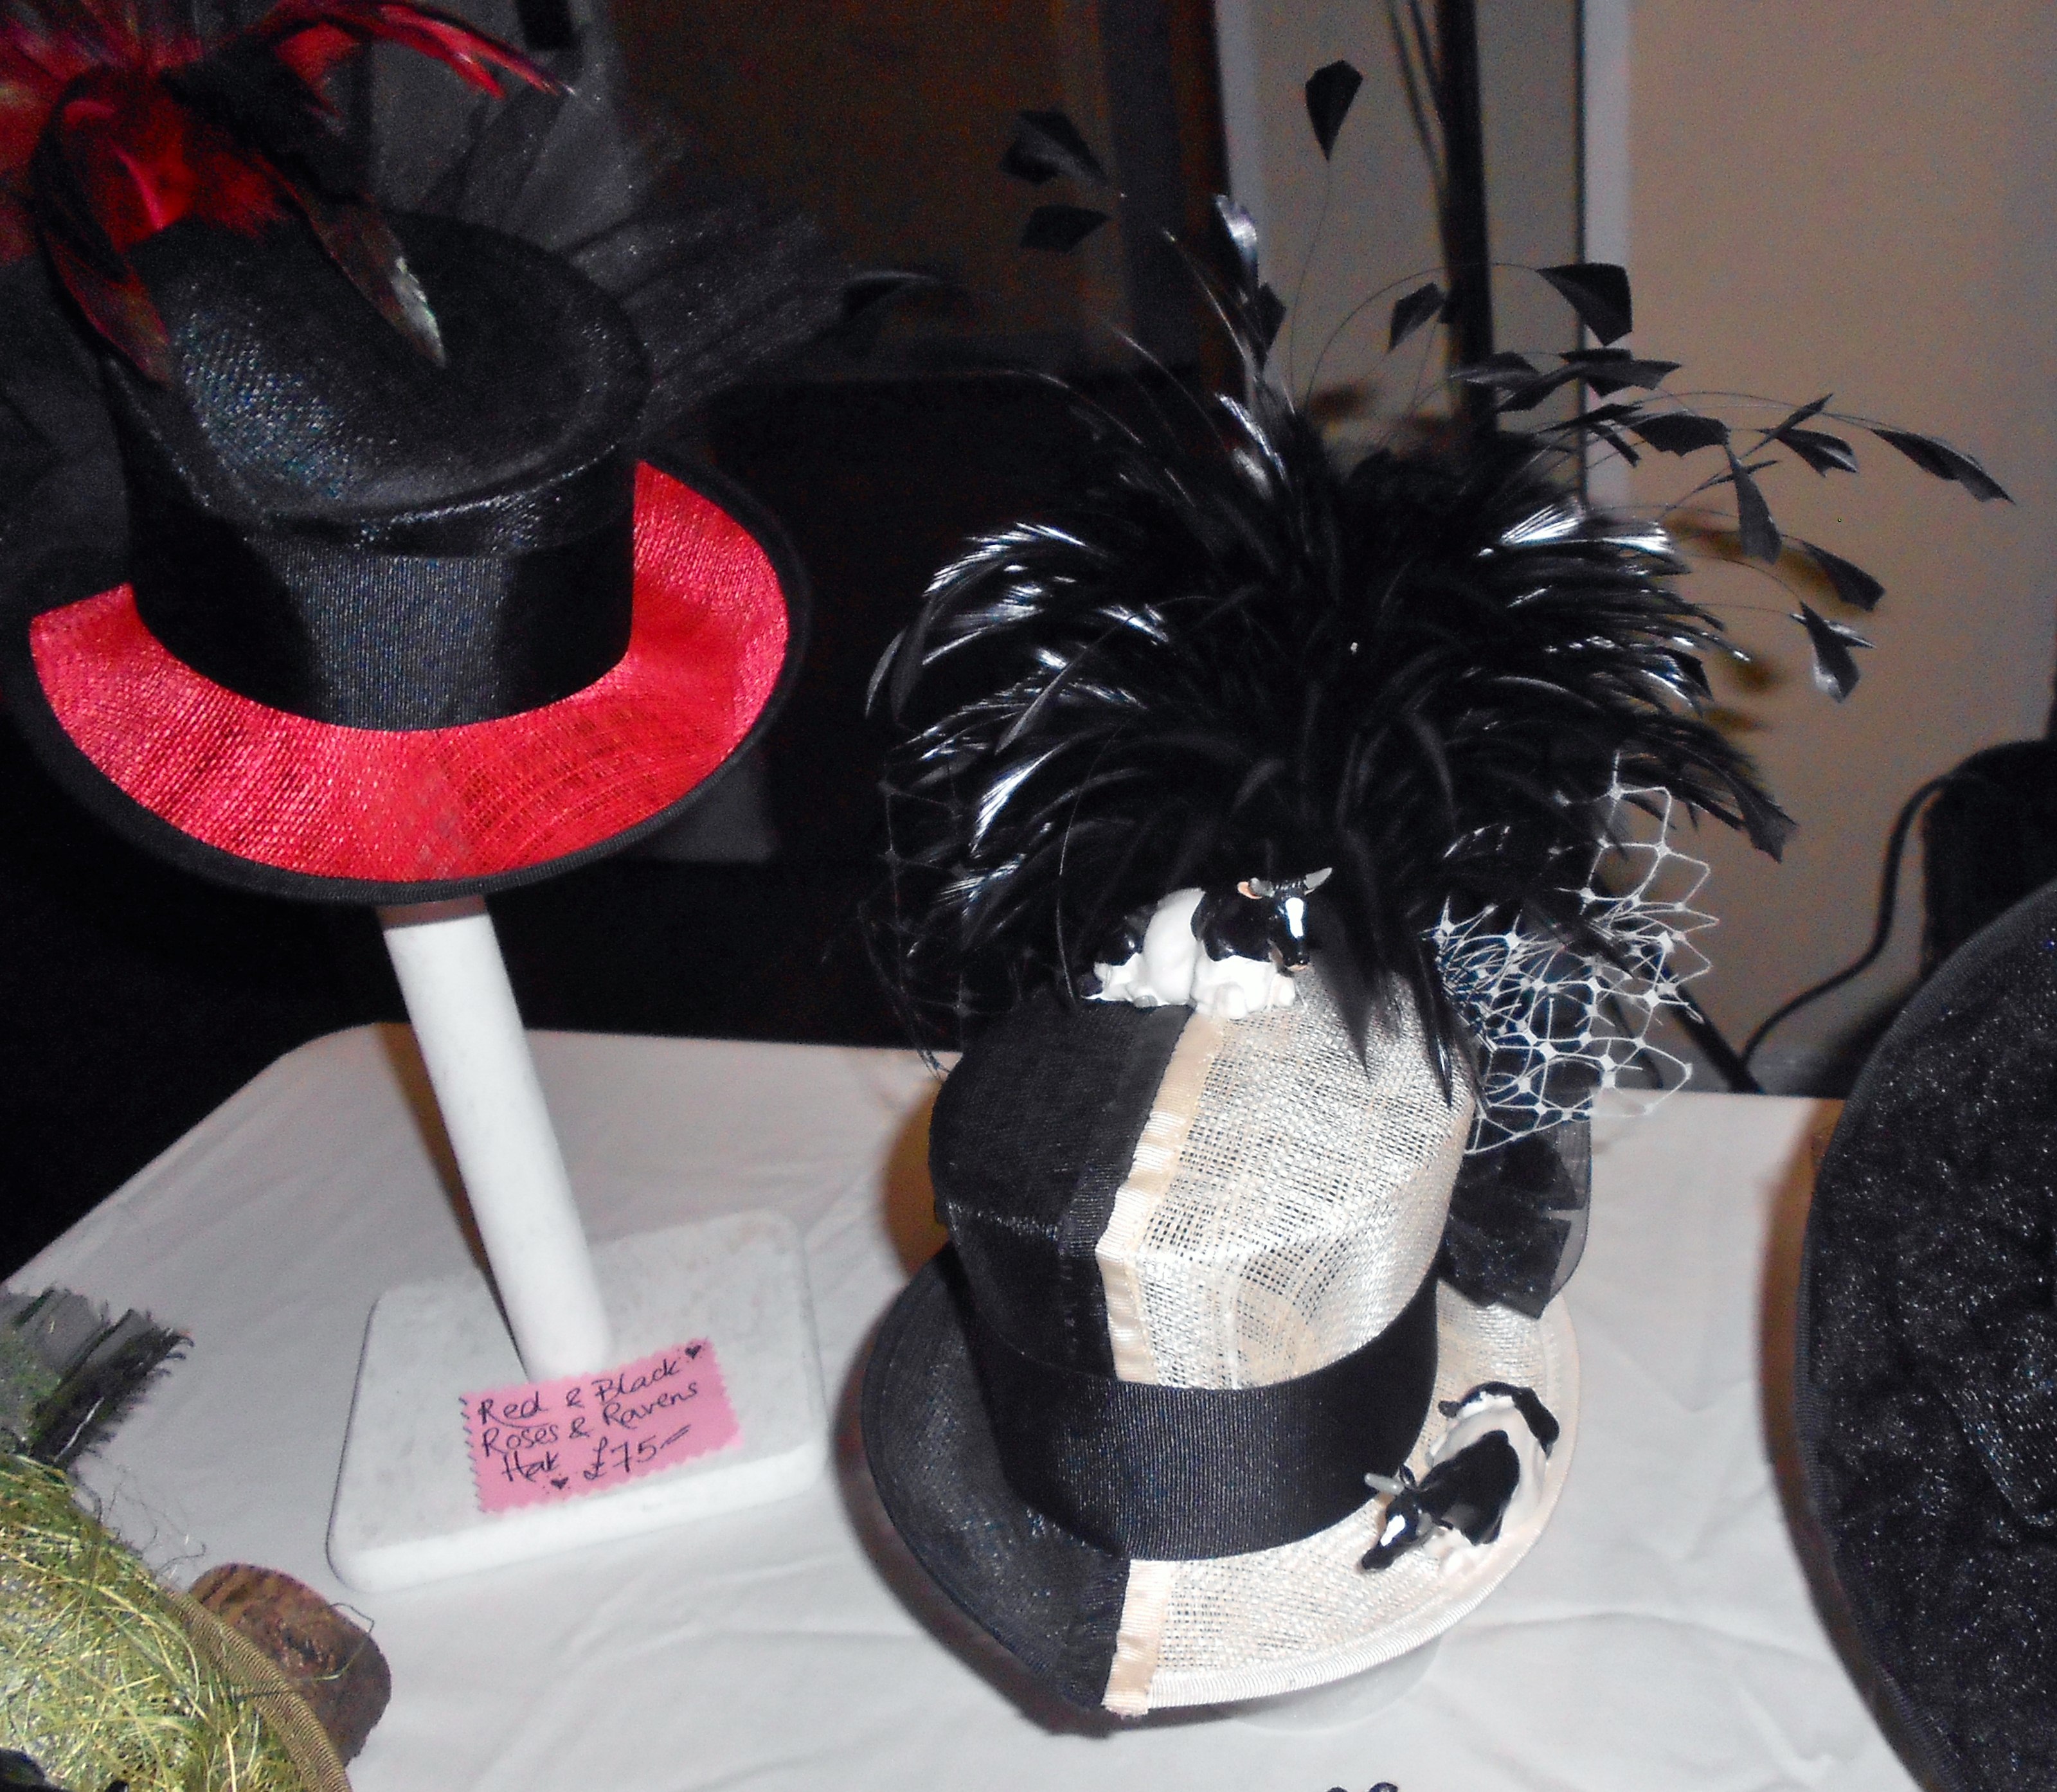 Hats by Heather Wilson, "Maker of Mad & Beautiful Things"